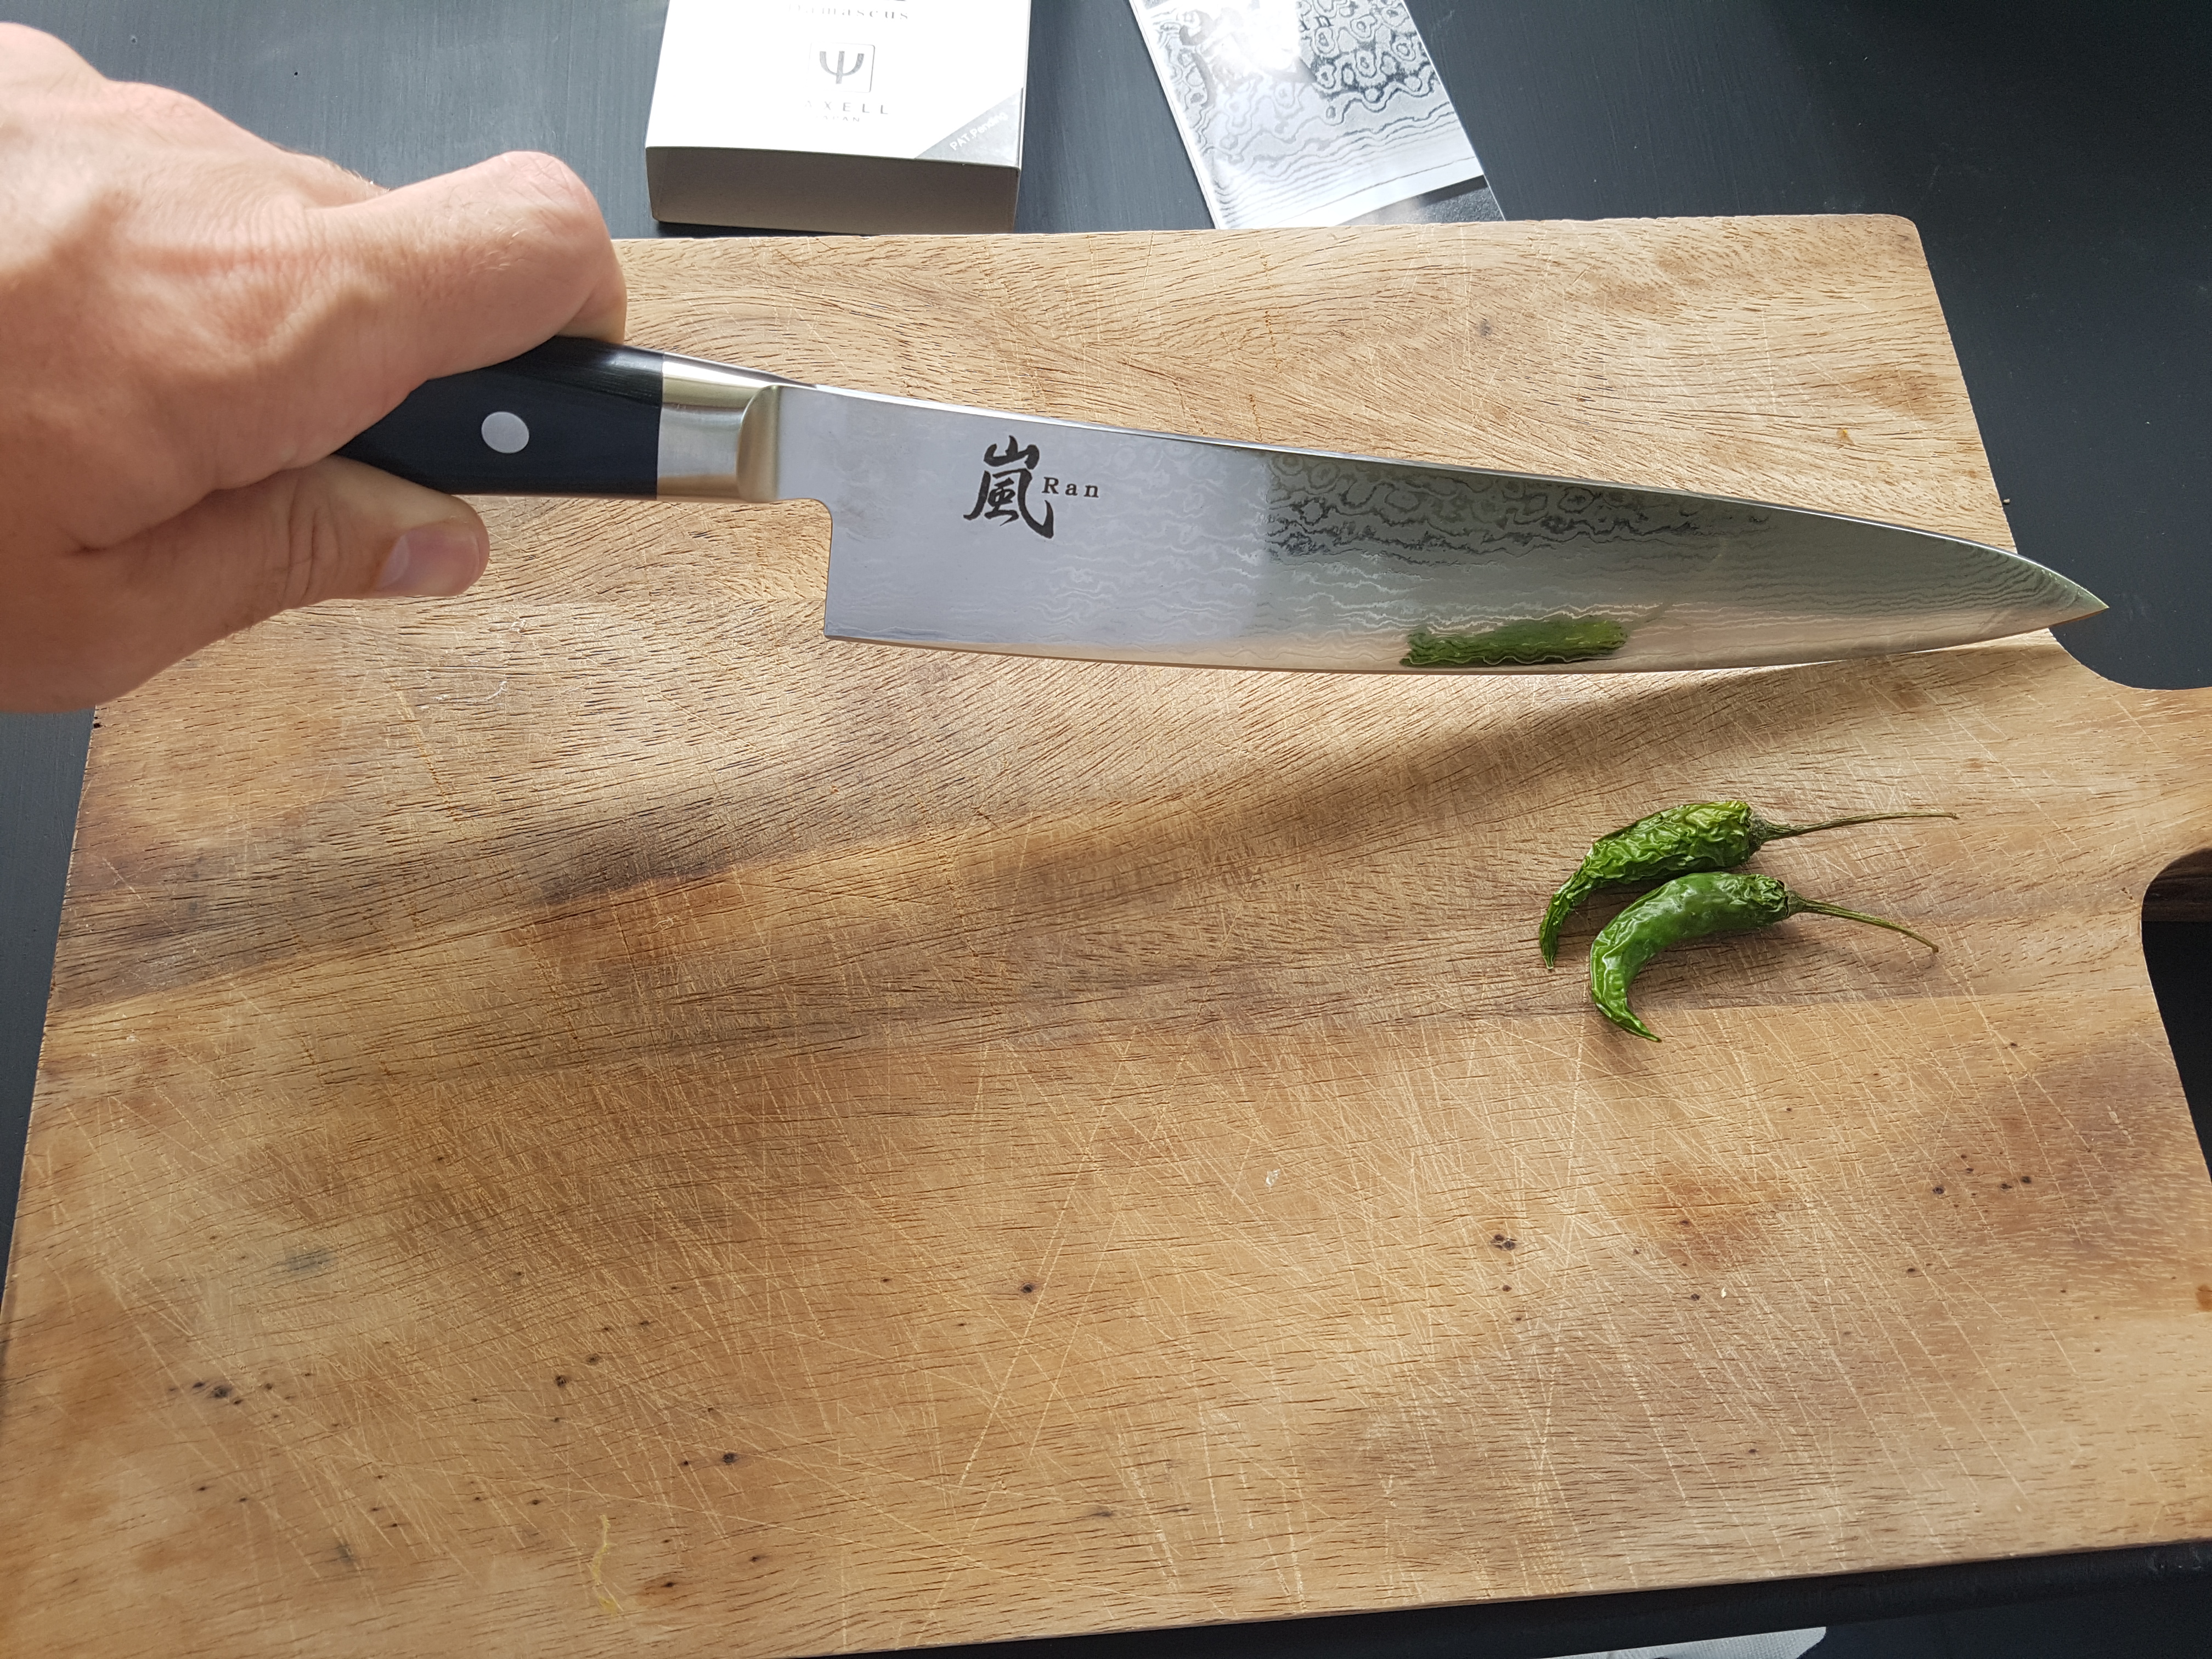 The perfect chefs knife from Yaxell